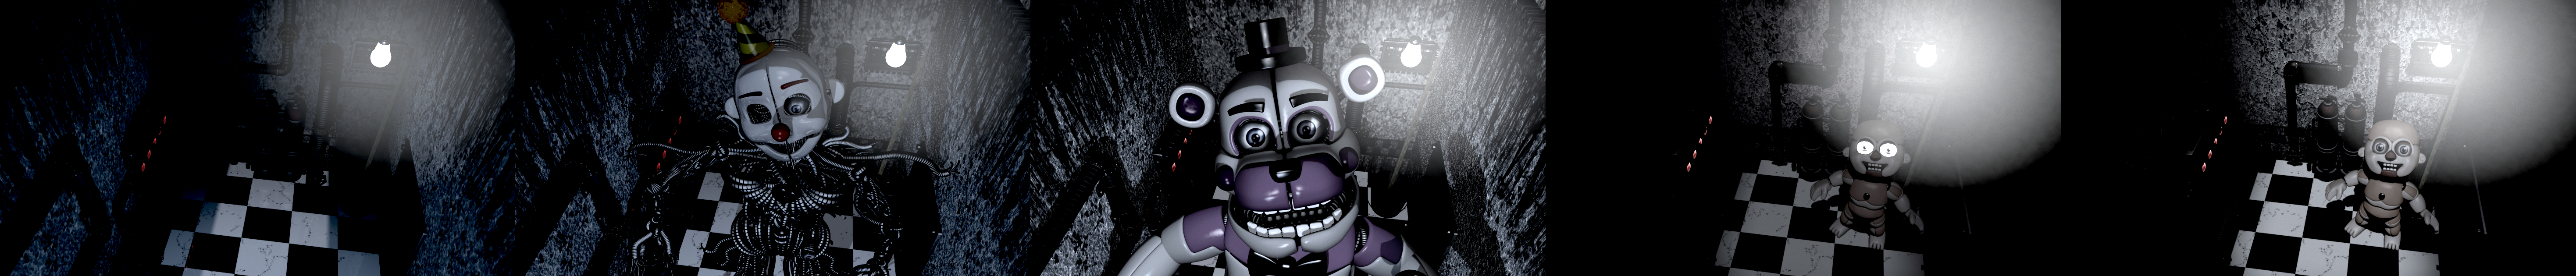 Five Nights at Freddy's: Sister Location - CAM 04